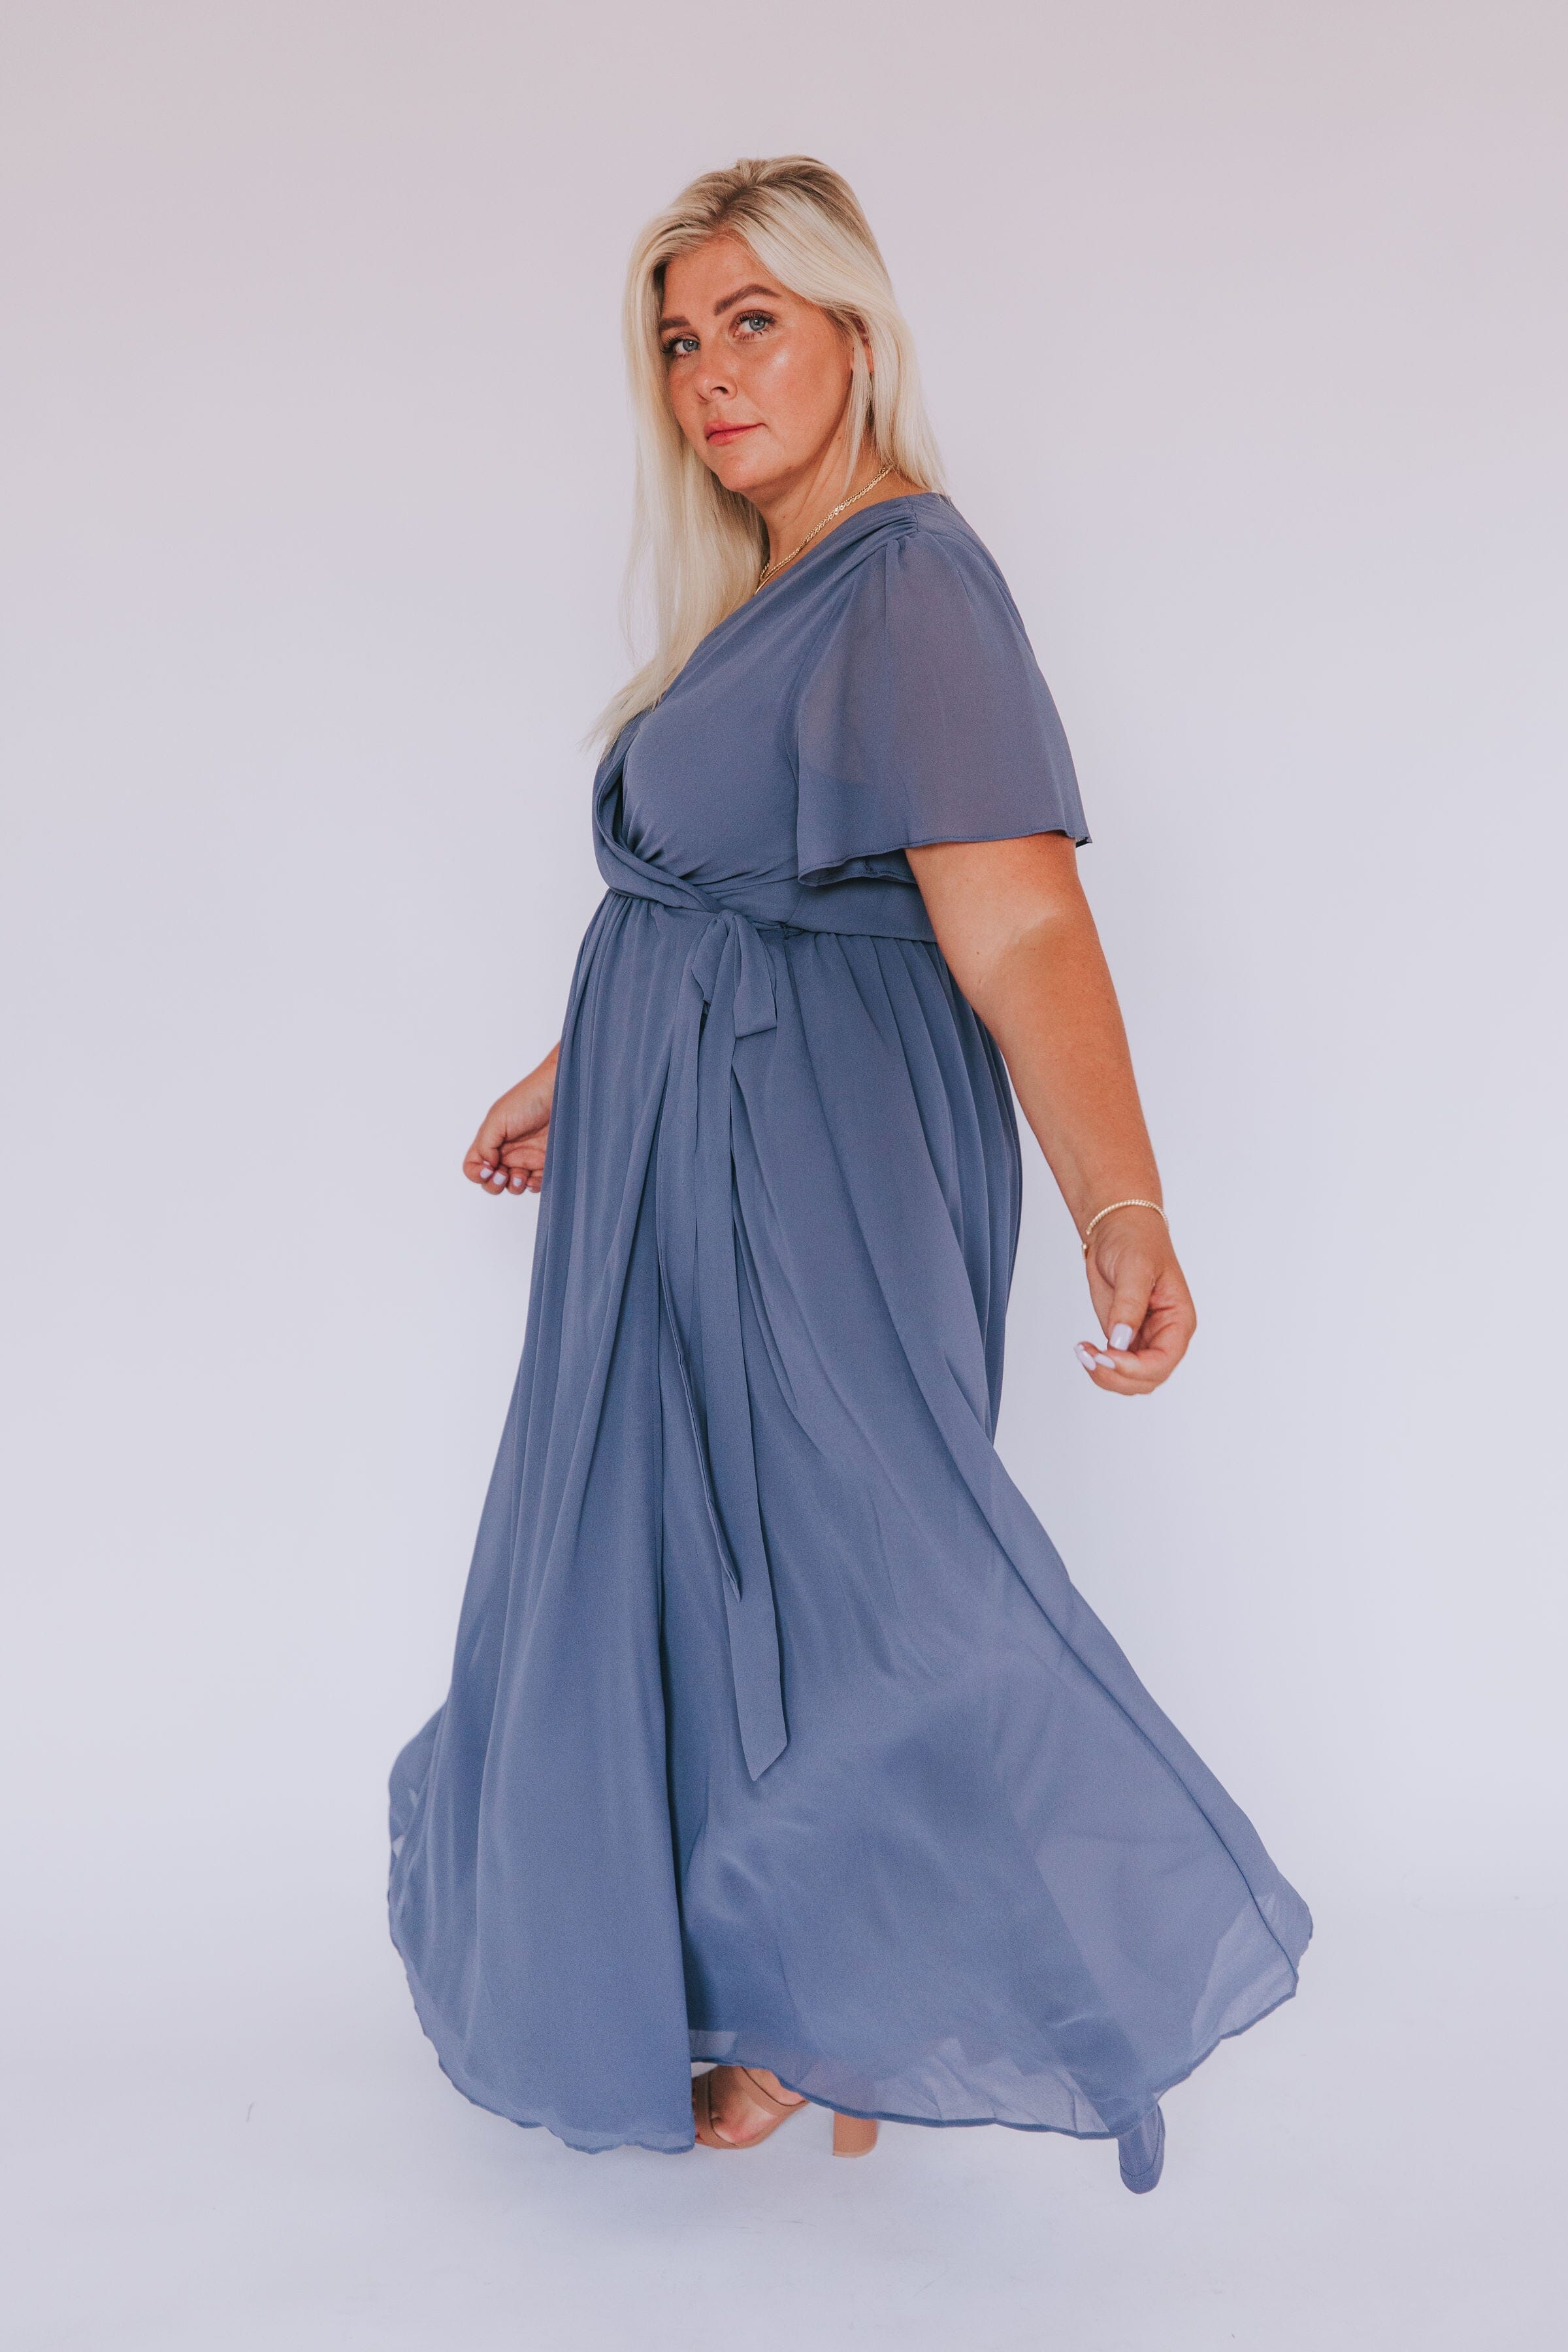 PLUS SIZE - Staying Here Dress - 2 Colors!